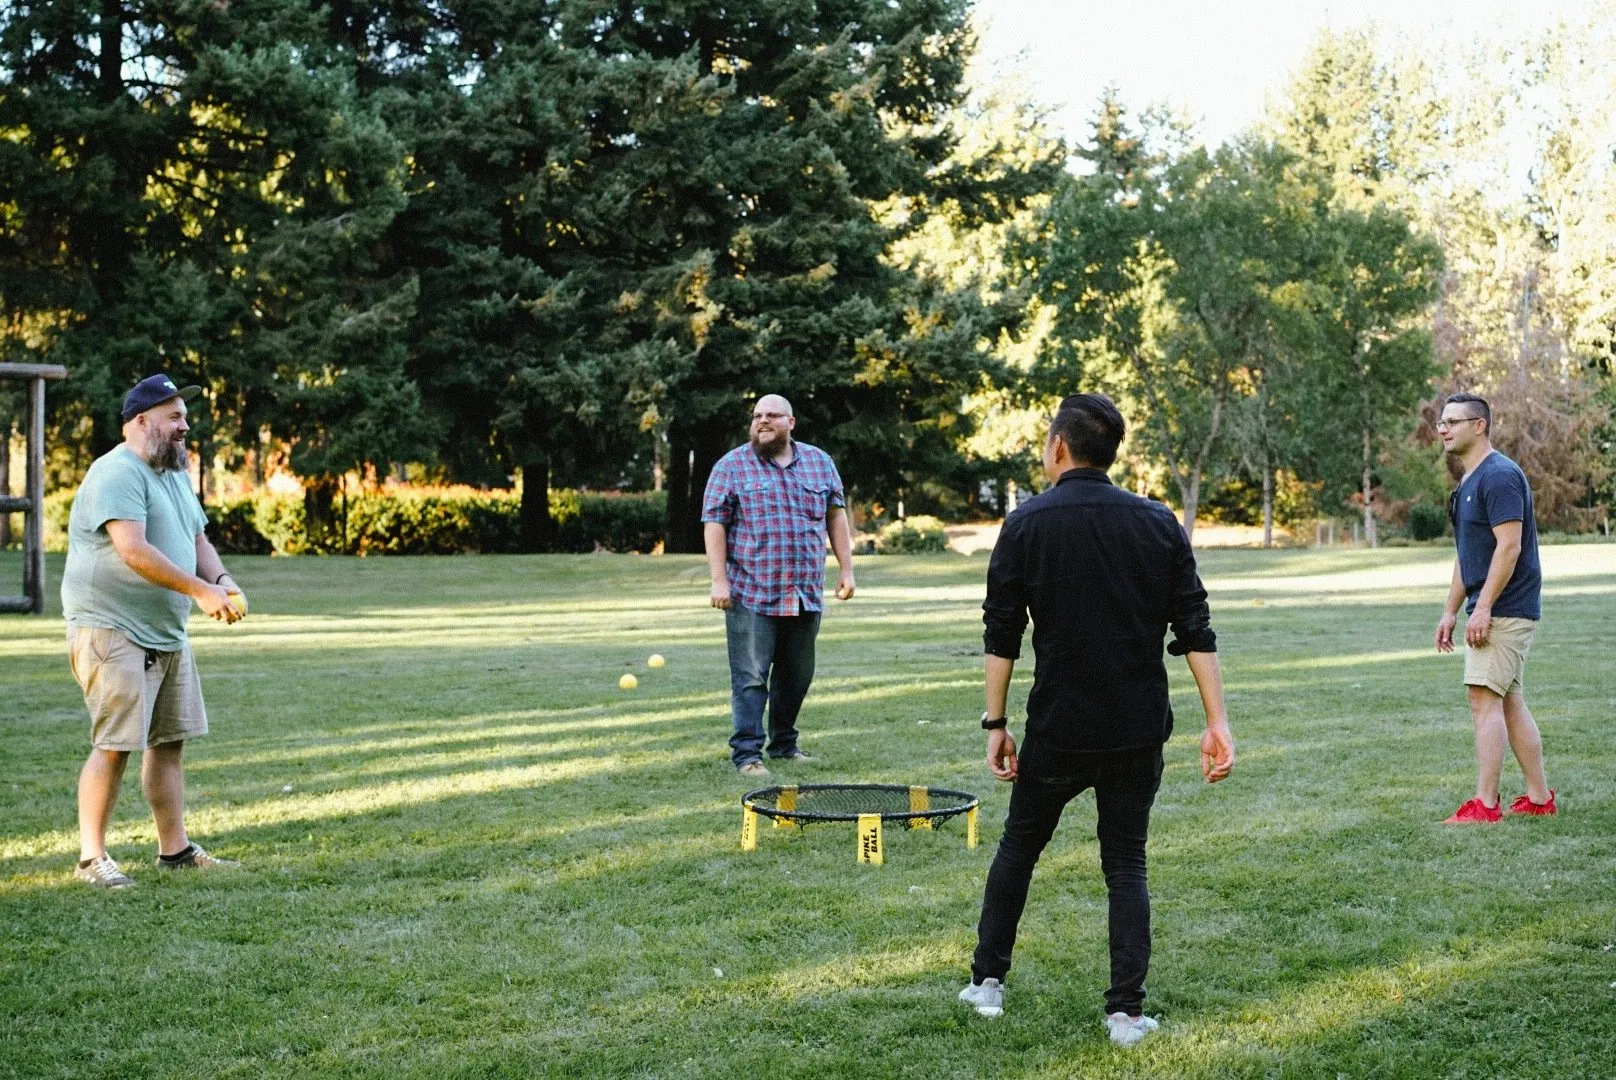 People having fun in a summer evening playing spikeball